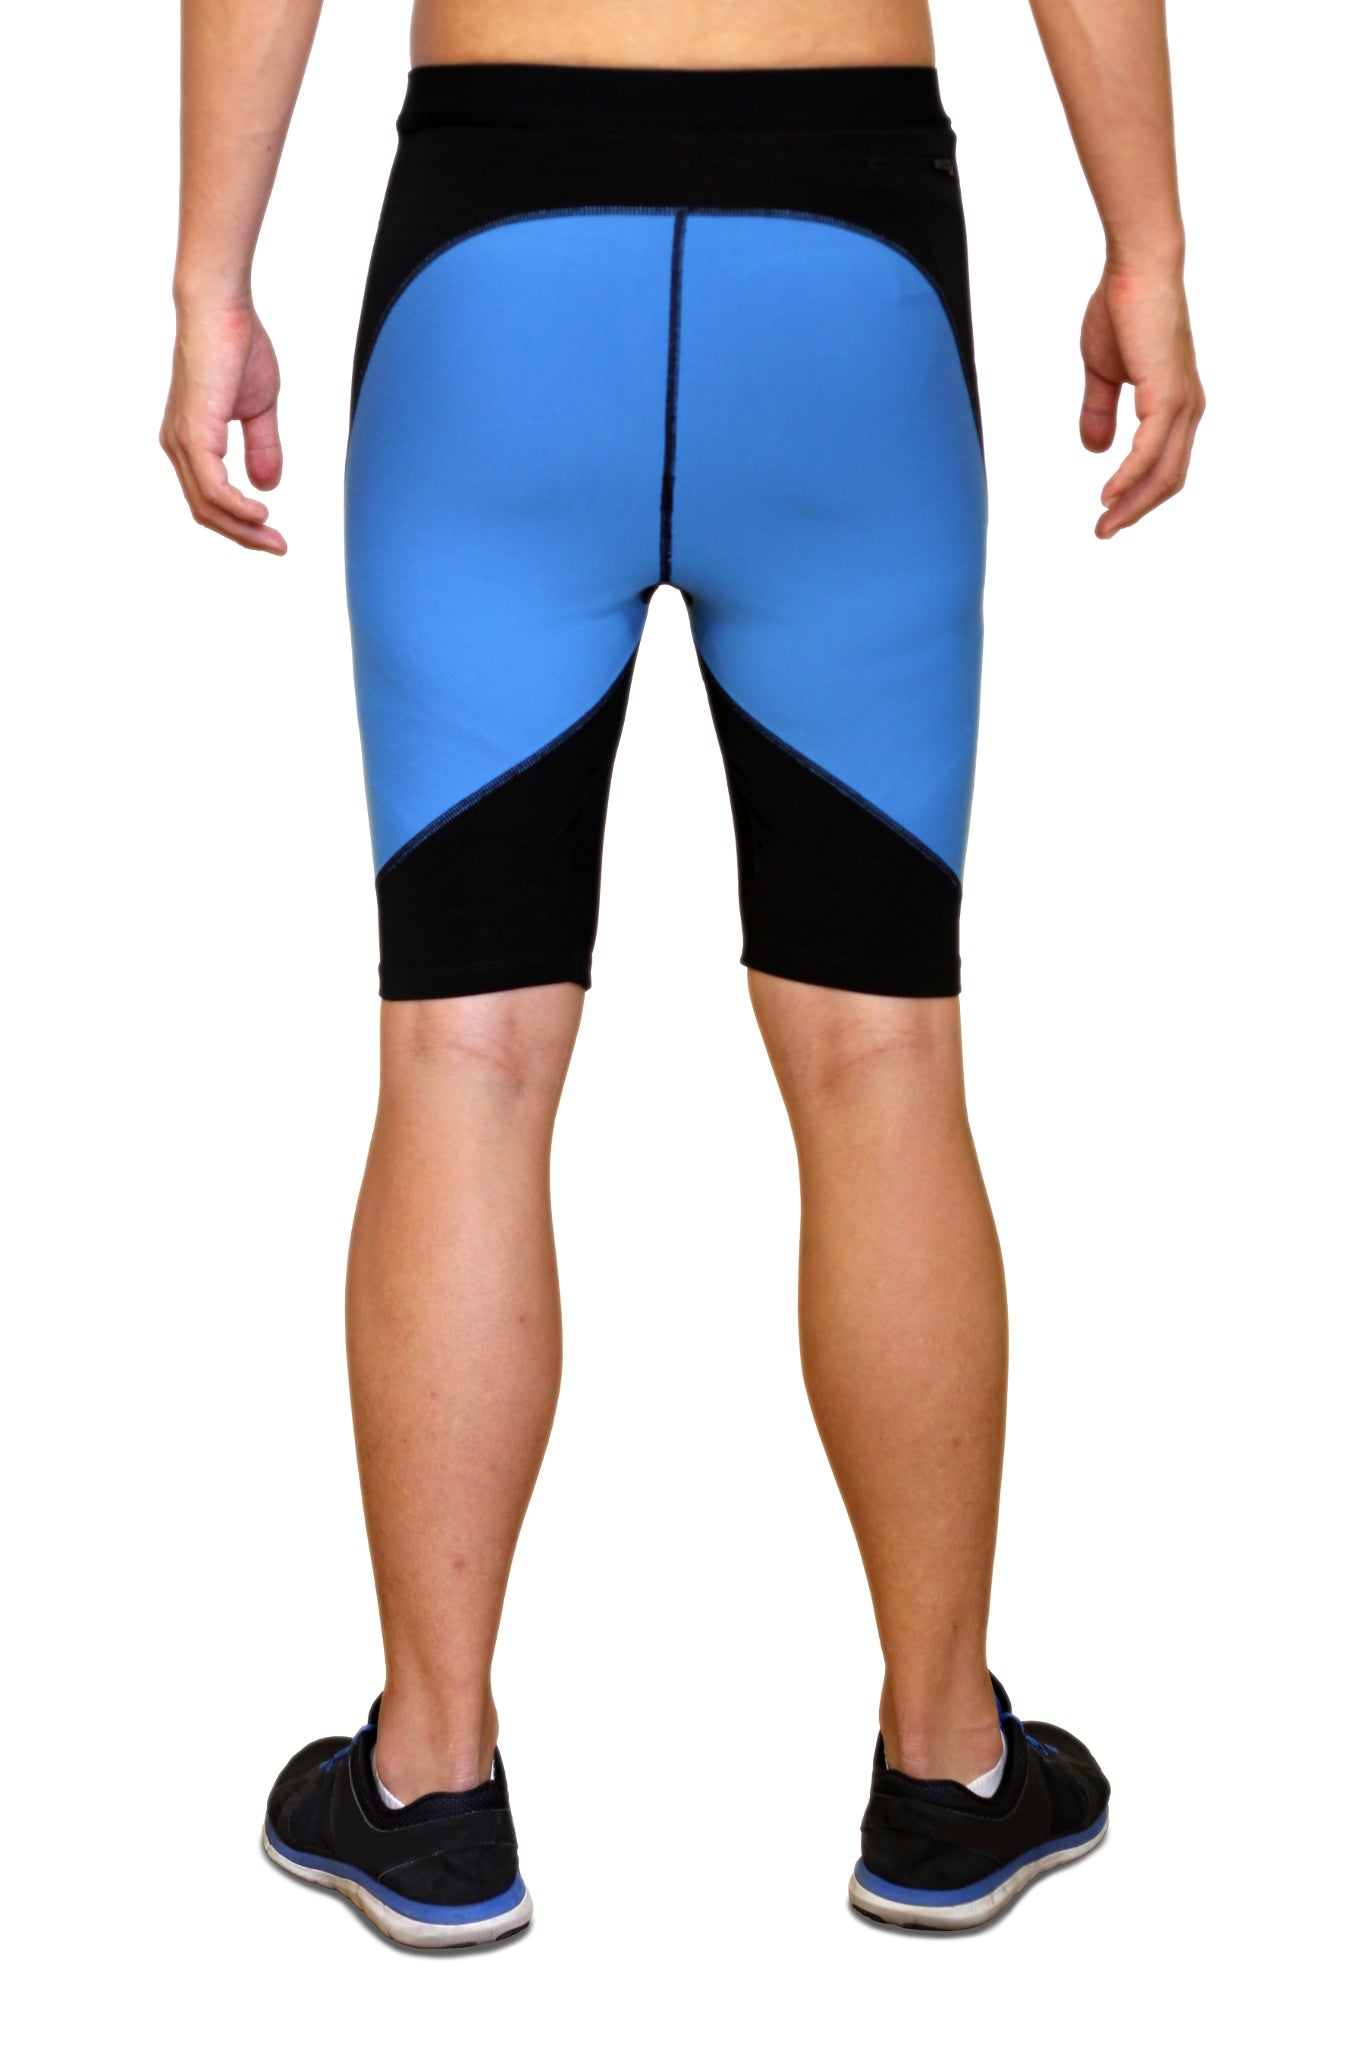 Pro Resistance Shorts for Men - Olympic Blue – Physiclo